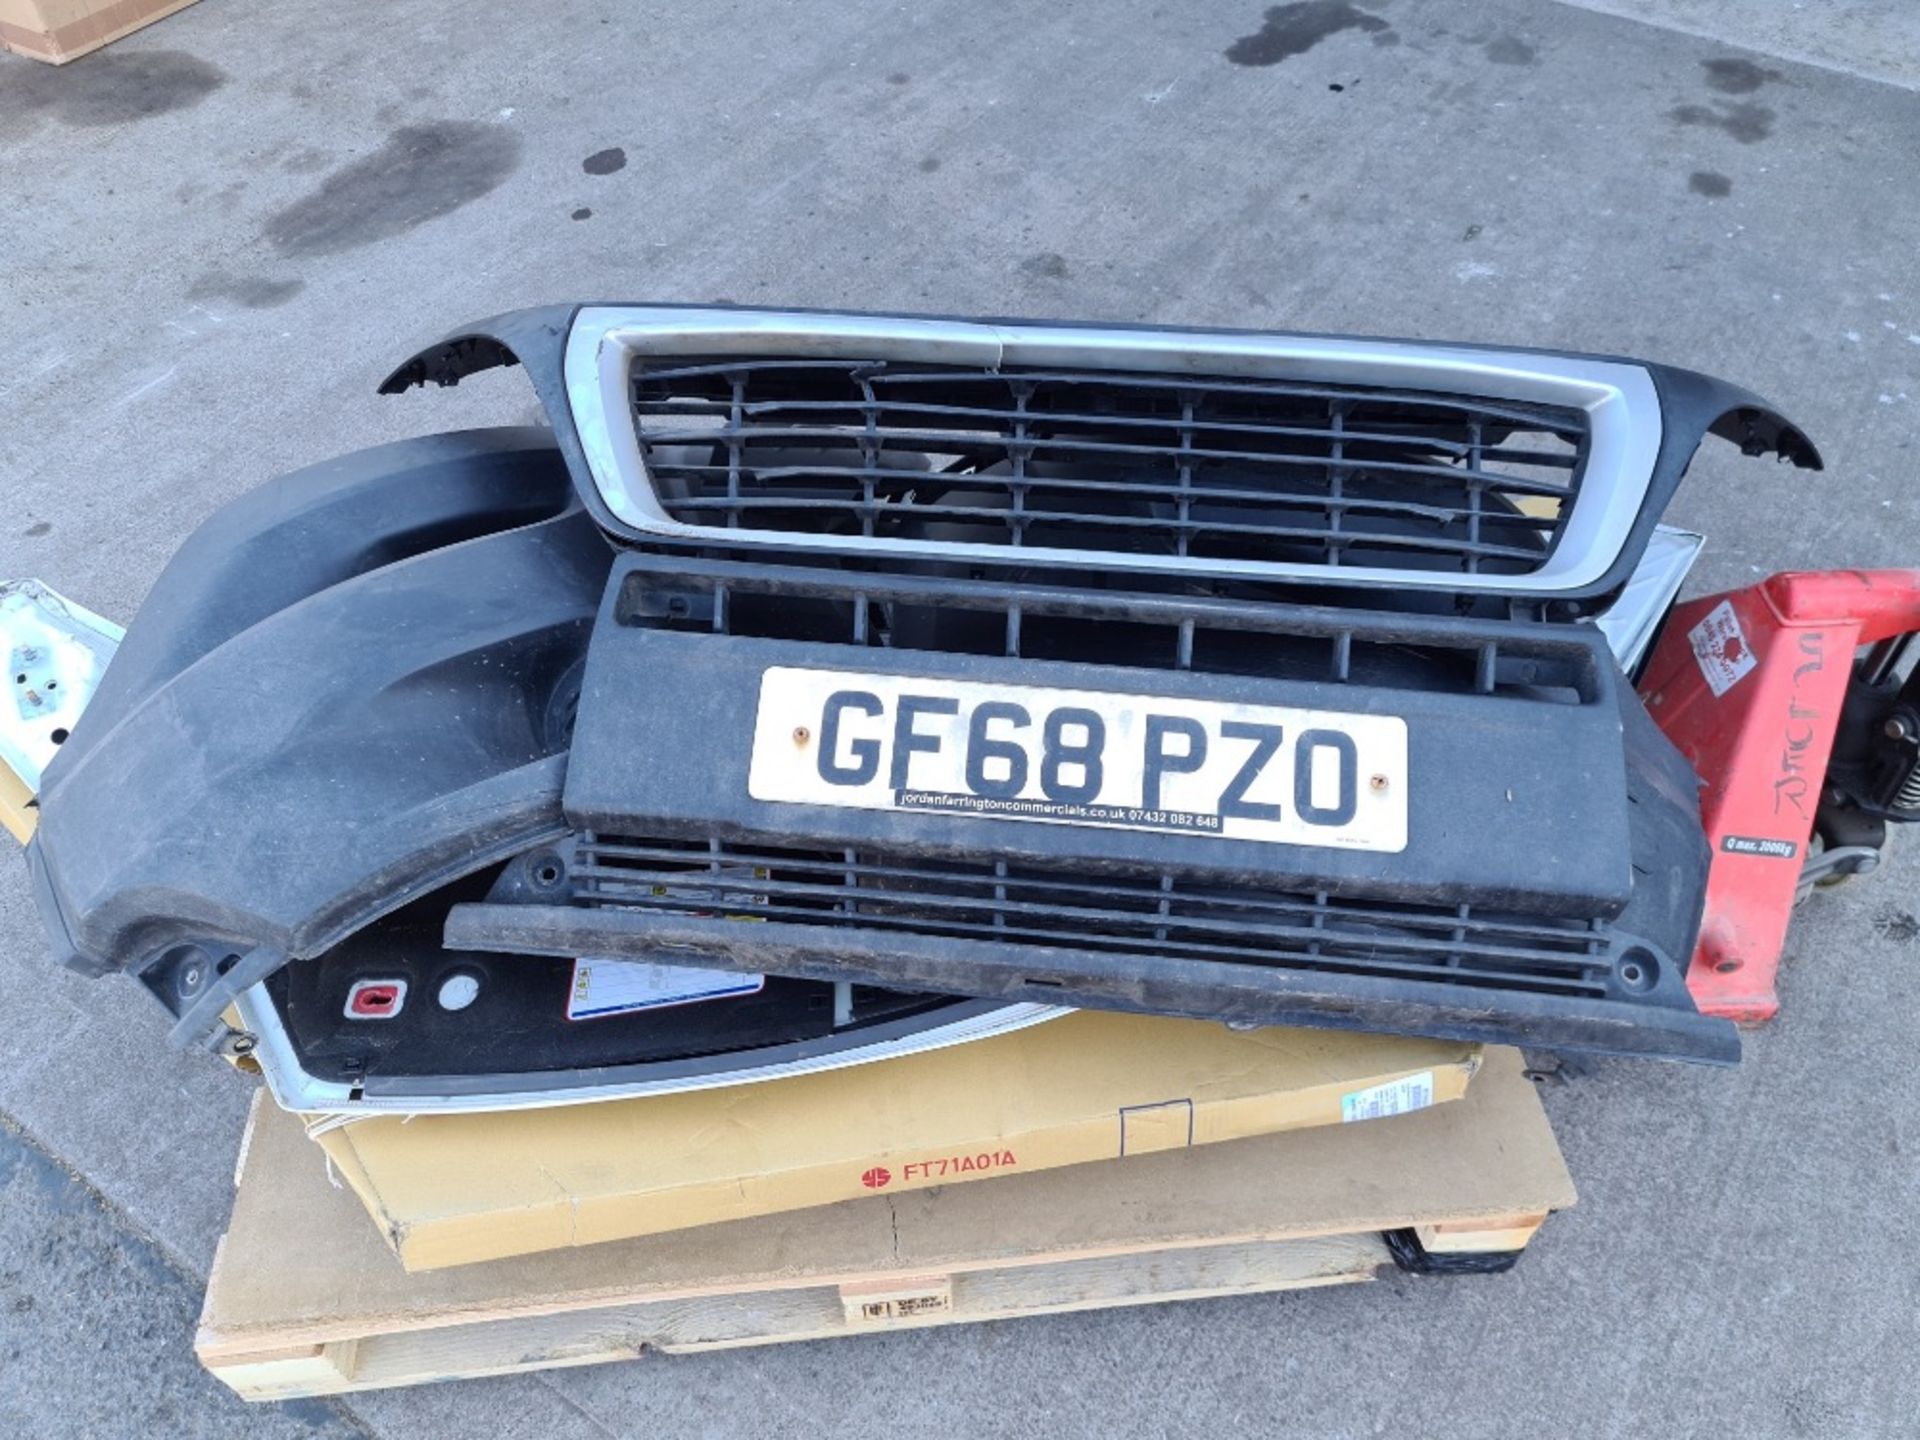 Pallet of misc items incl new bonnet and used parts for 2018 Peugot Boxer van. - Image 5 of 5